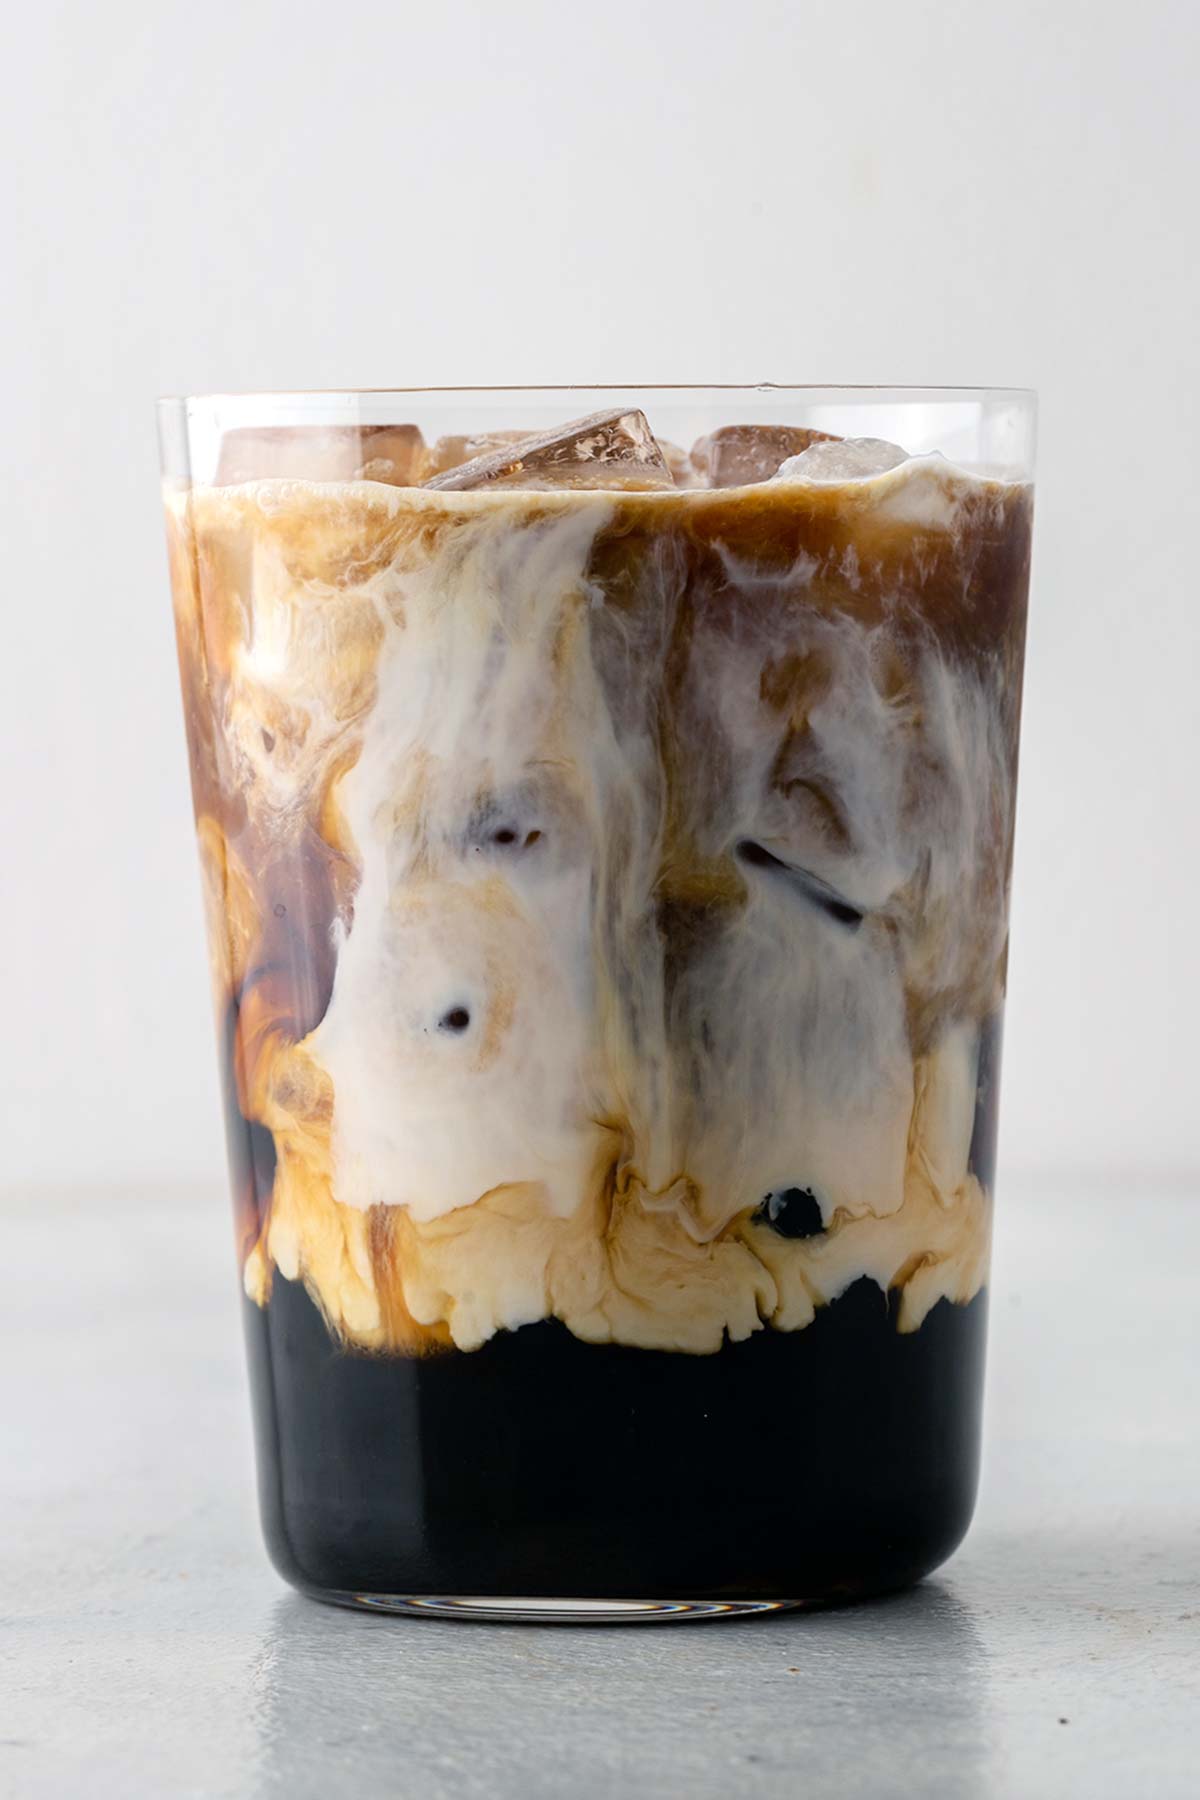 Iced Coffee Boba with swirling milk and boba at the bottom of a clear glass.